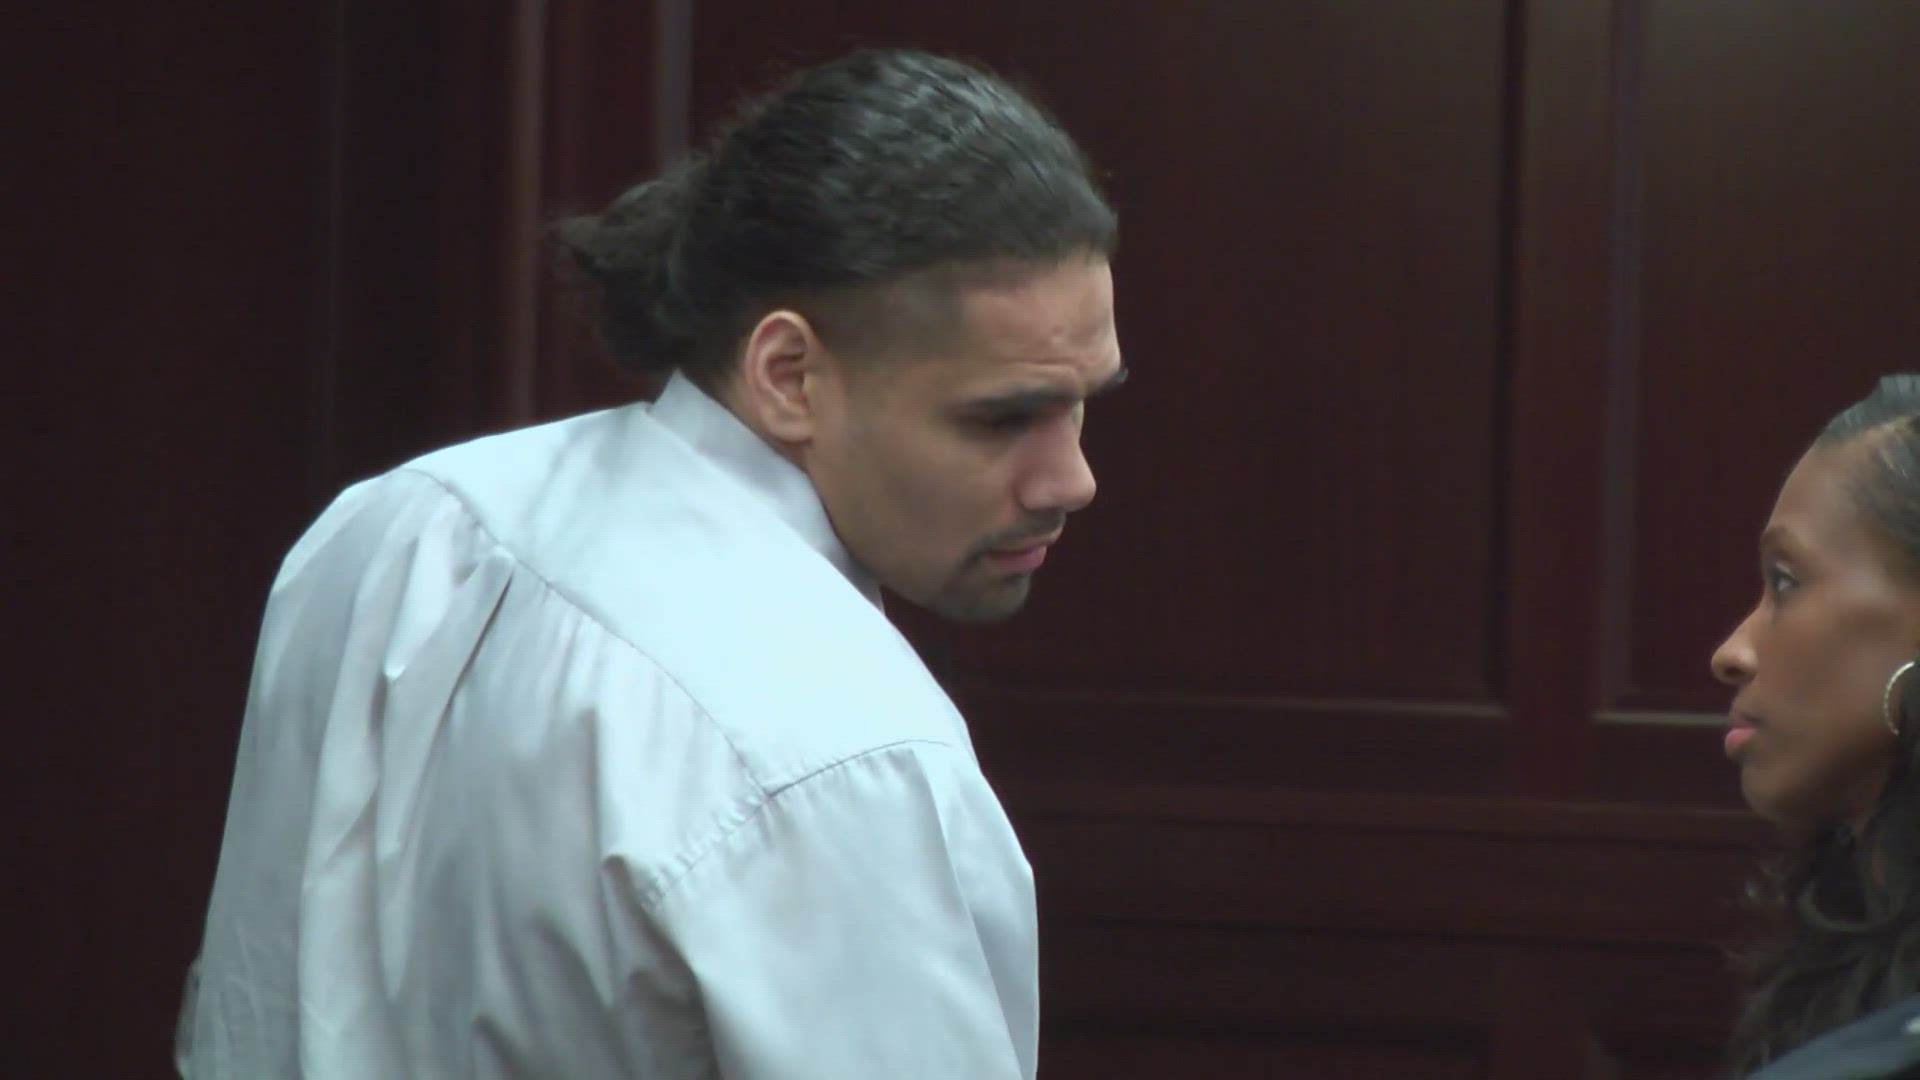 Prosecutors believe Quiles was the father of the unborn baby. He will now face the possibility of the death penalty.